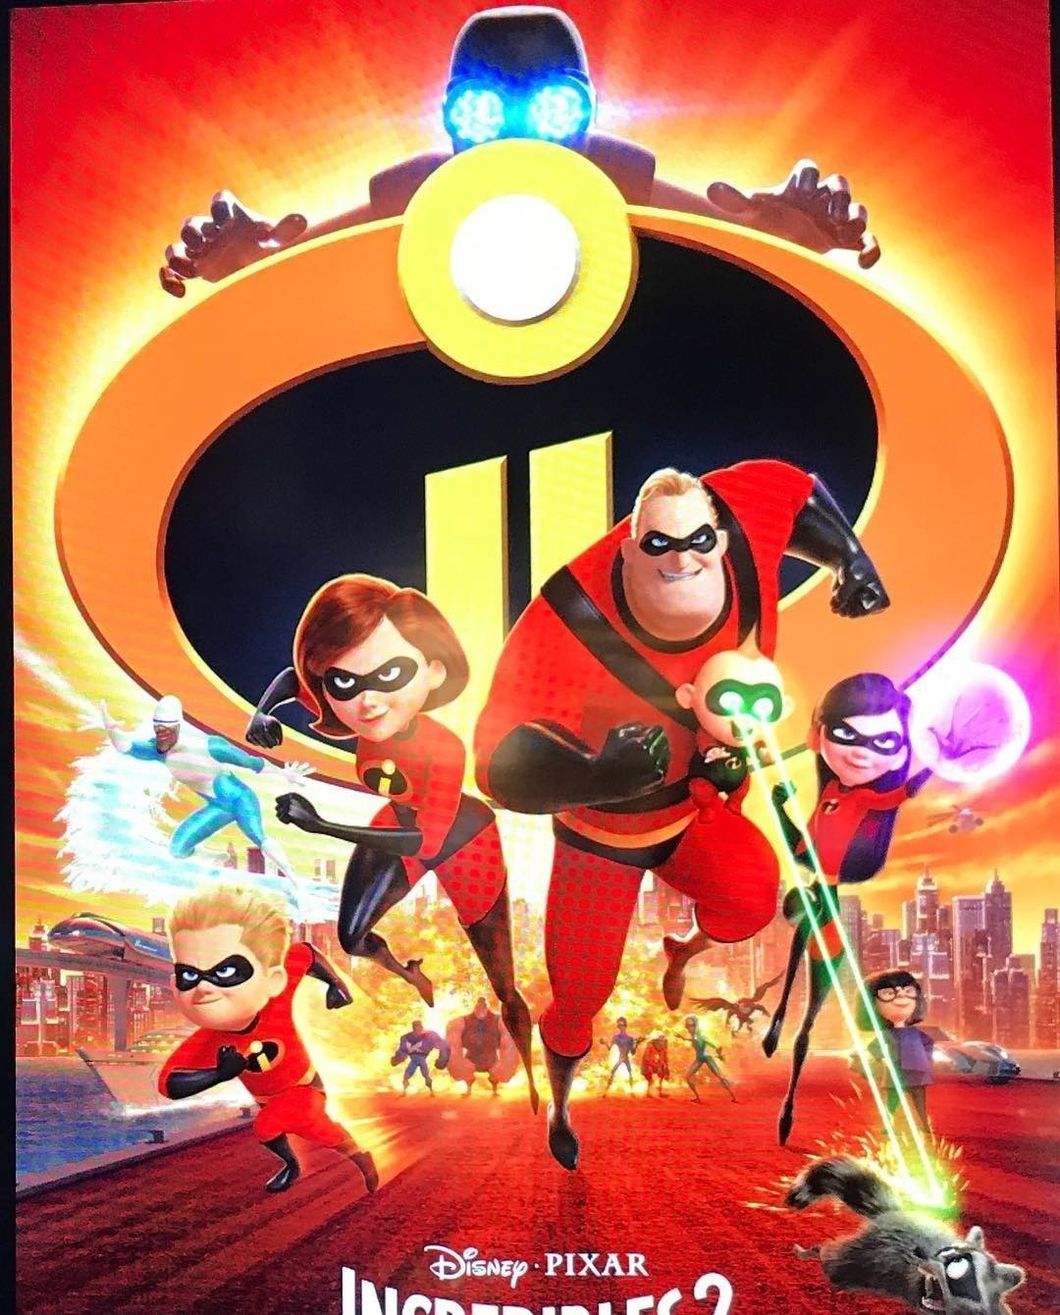 14 Years Later and we finally have 'Incredibles 2'